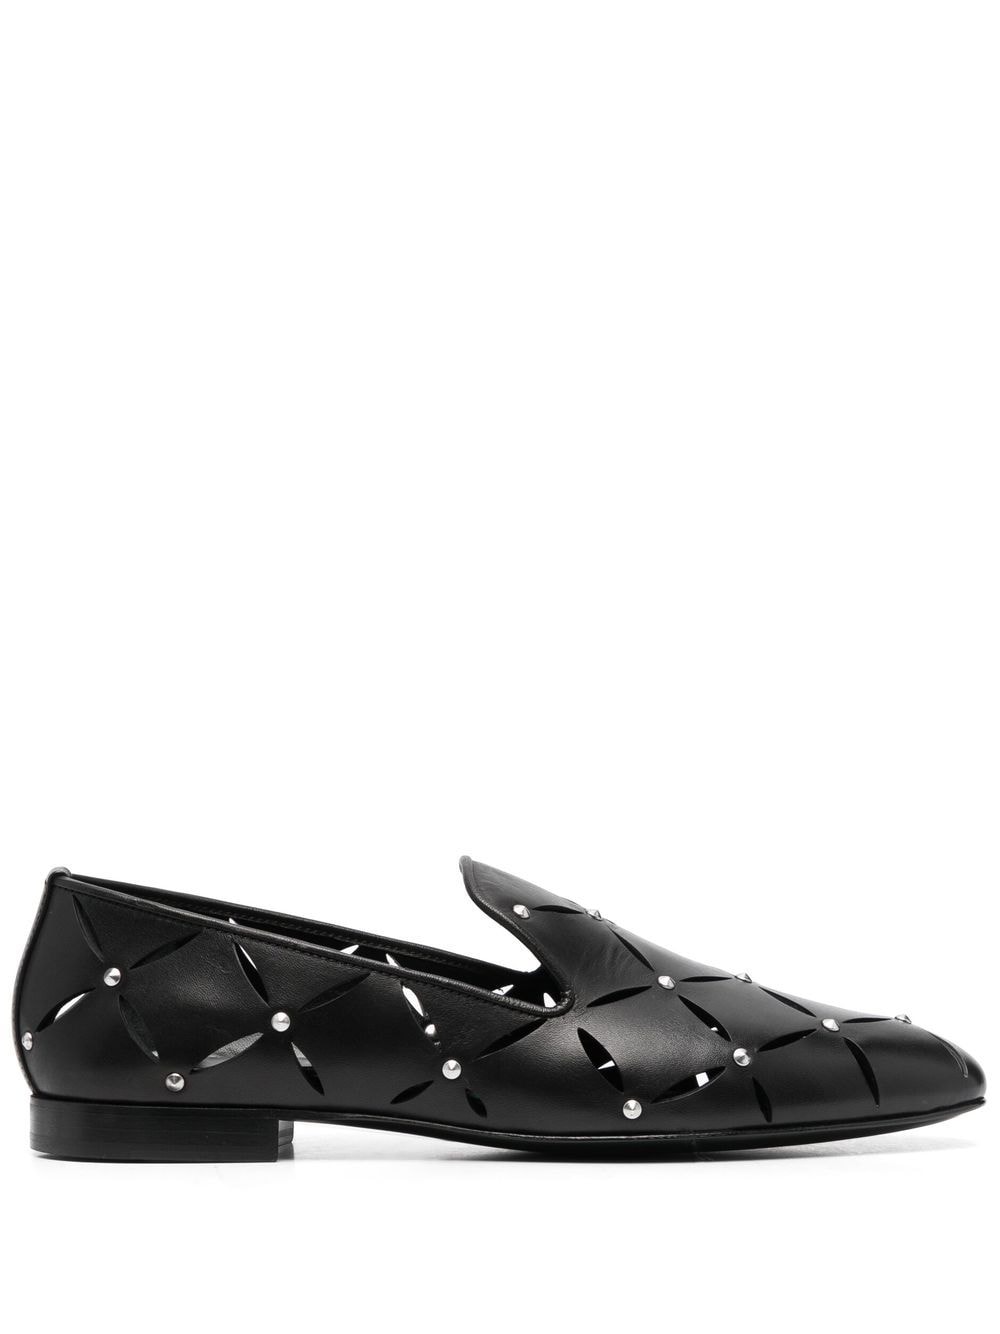 Versace cut-out leather loafers - Black